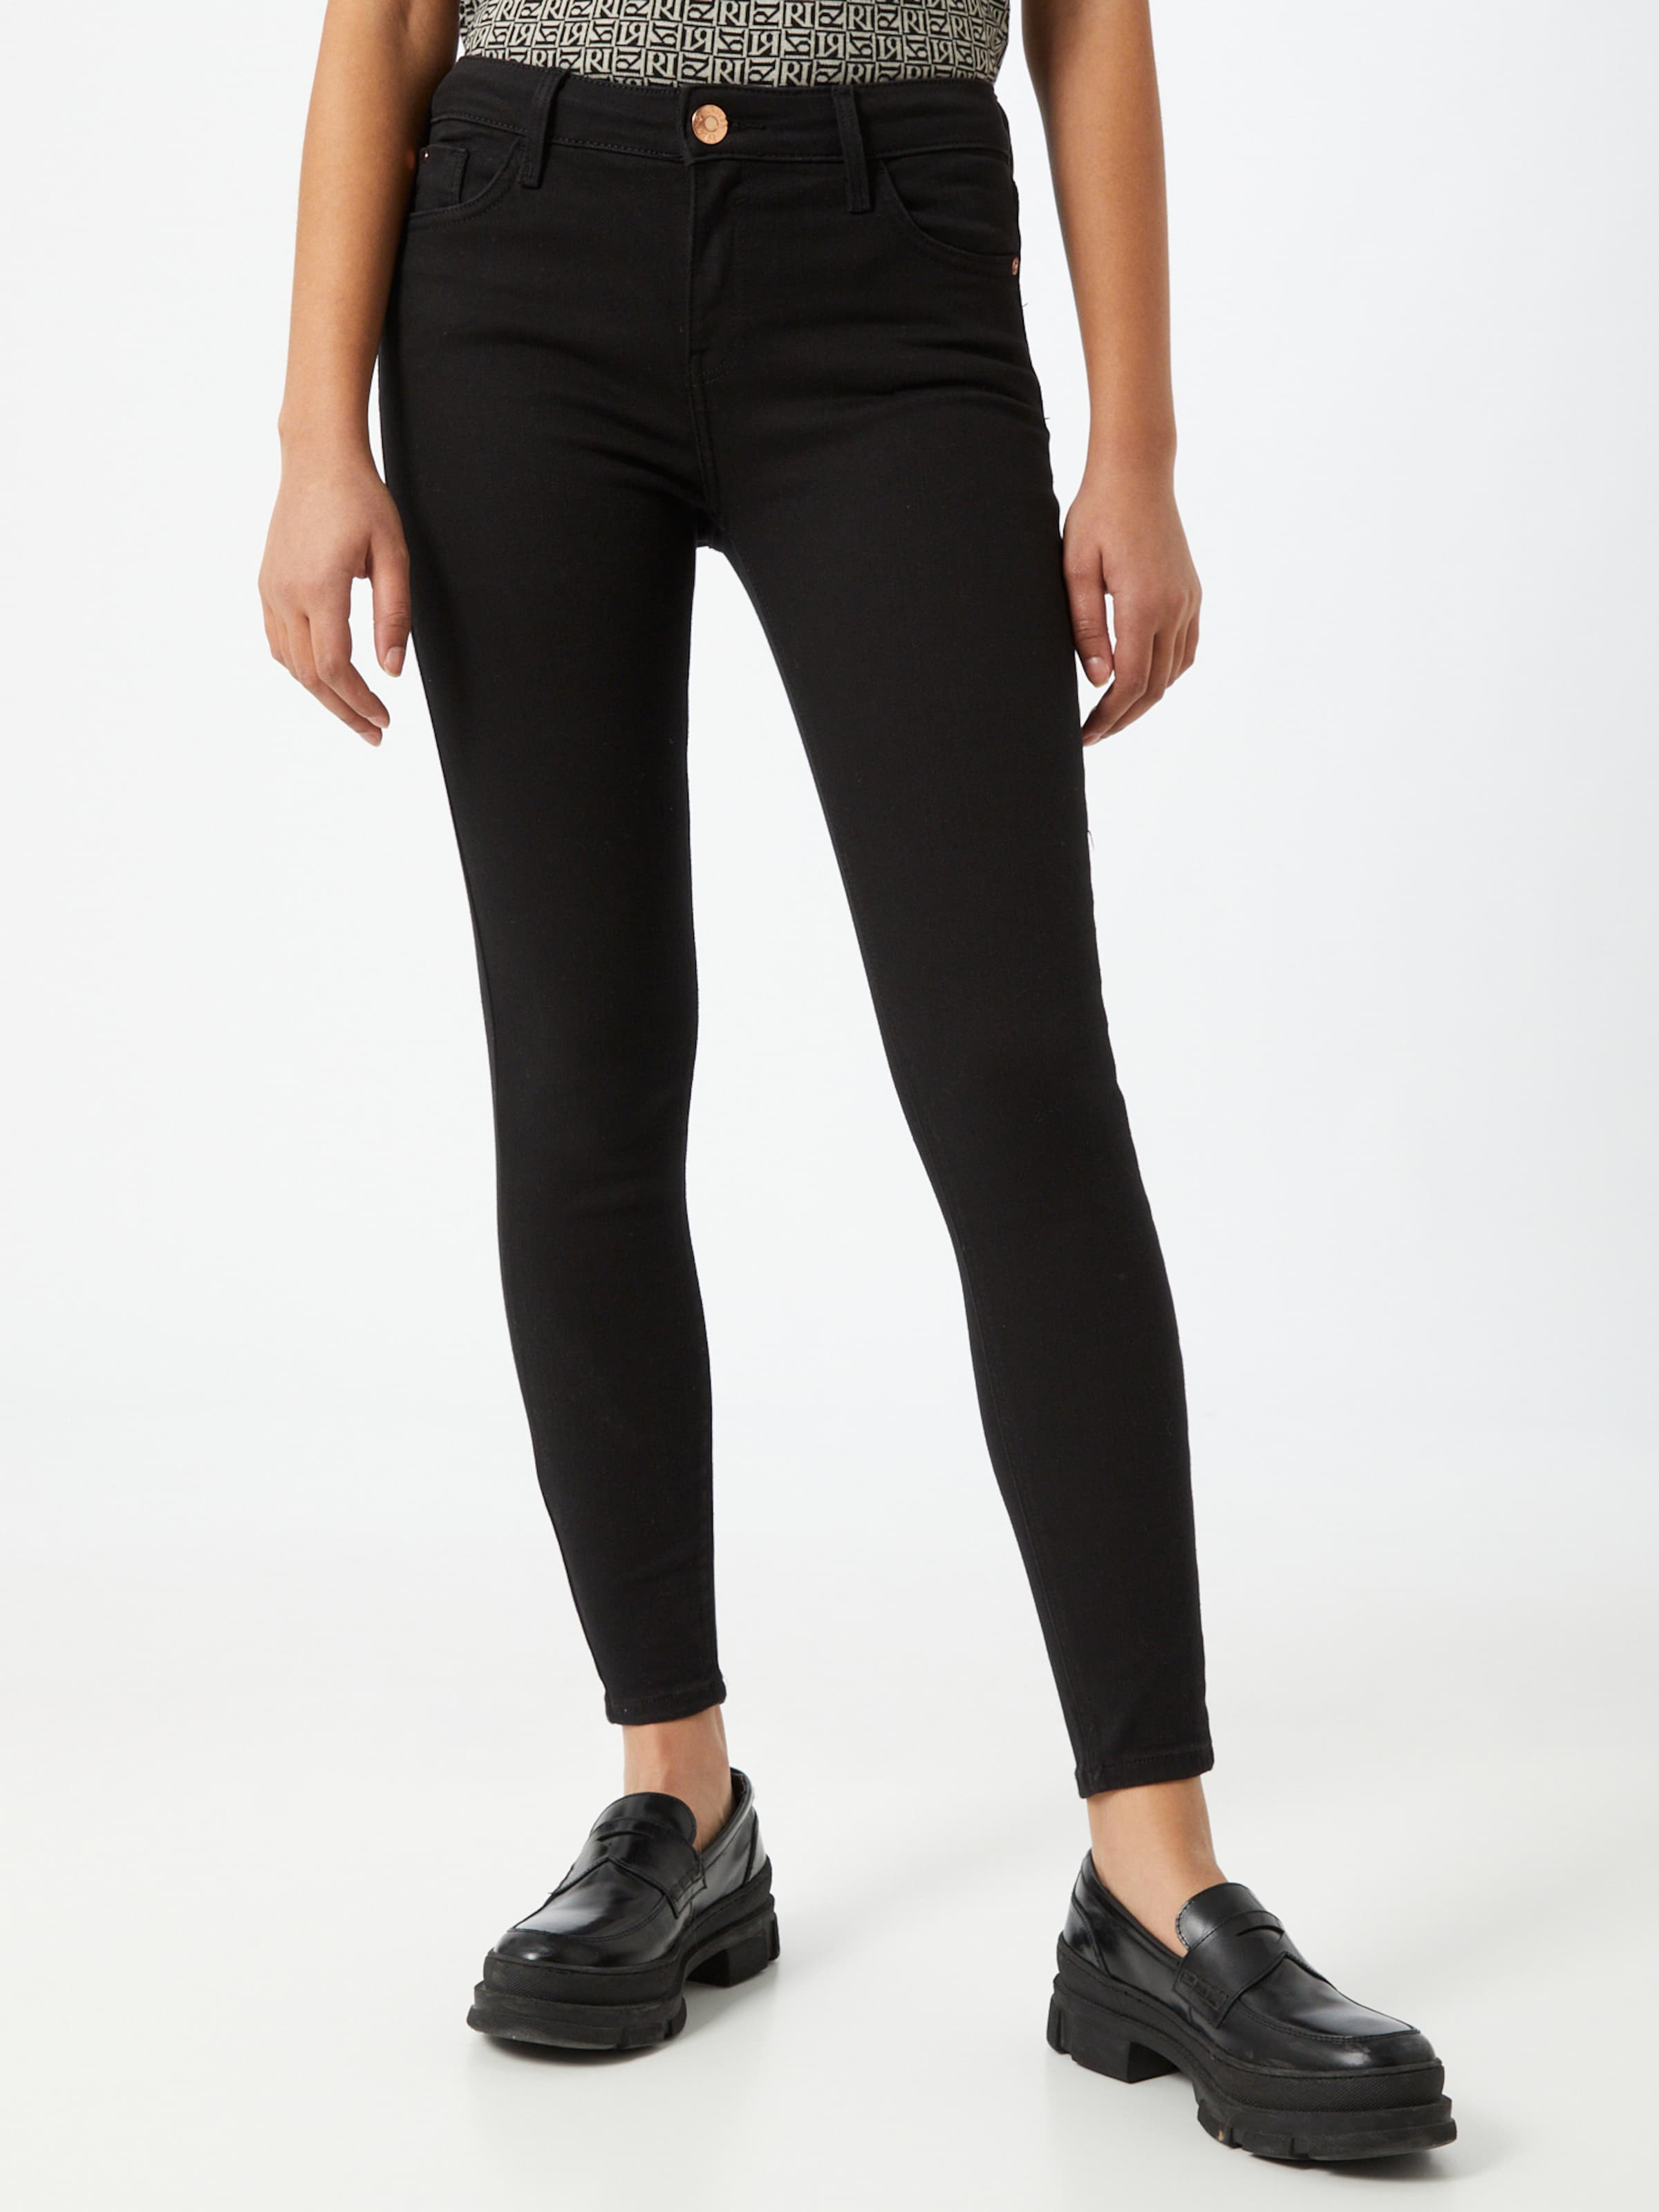 Jeans e7TPY River Island Jeans Amelie in Nero 